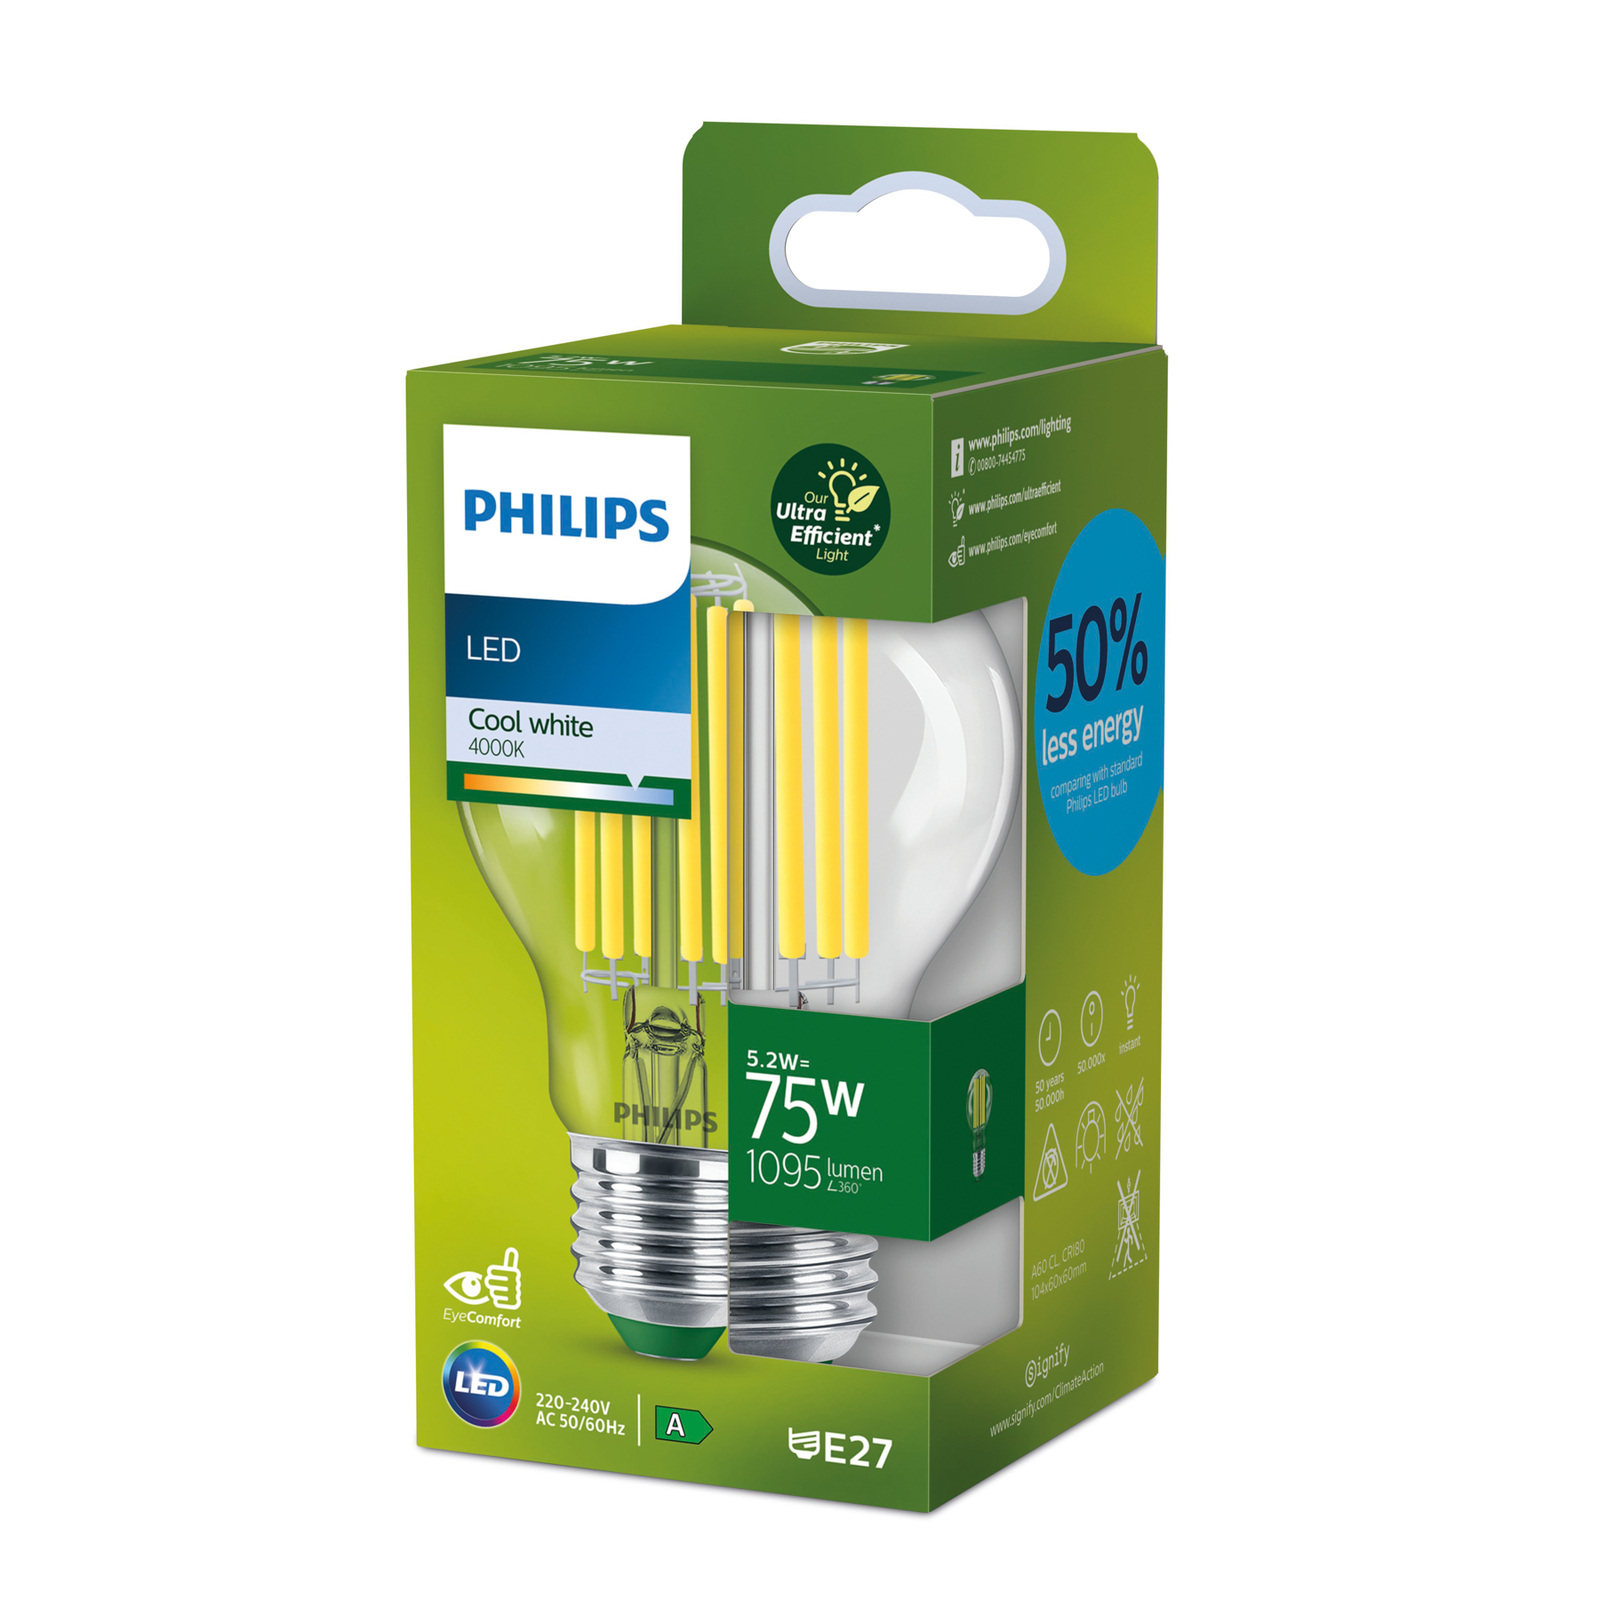 Philips E27 LED A60 5,2W 1095lm 4 000K claire